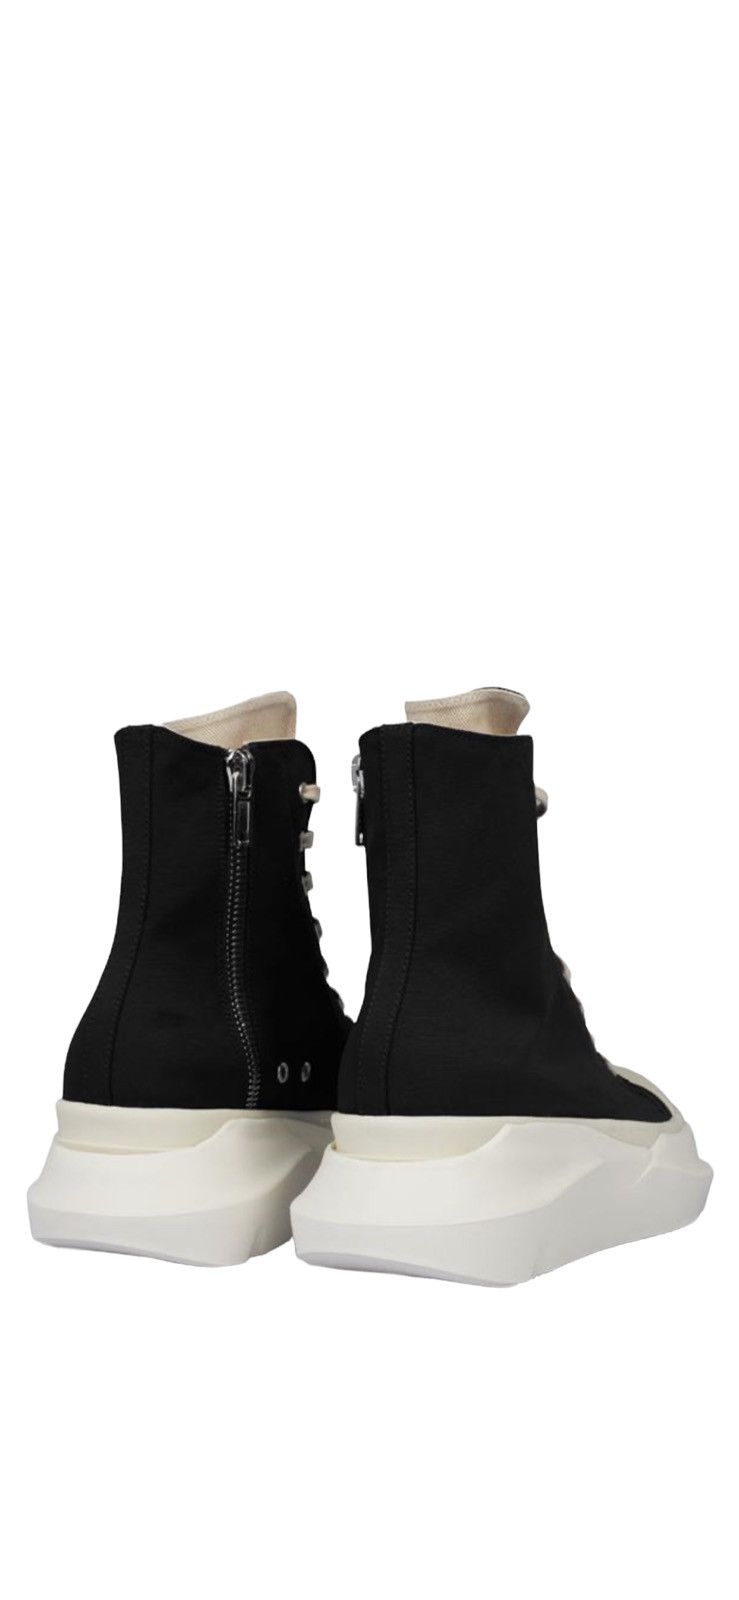 Rick Owens Drkshdw Rick Owen DS Abstract HI Sneakers Size US 11 / EU 44 - 4 Preview